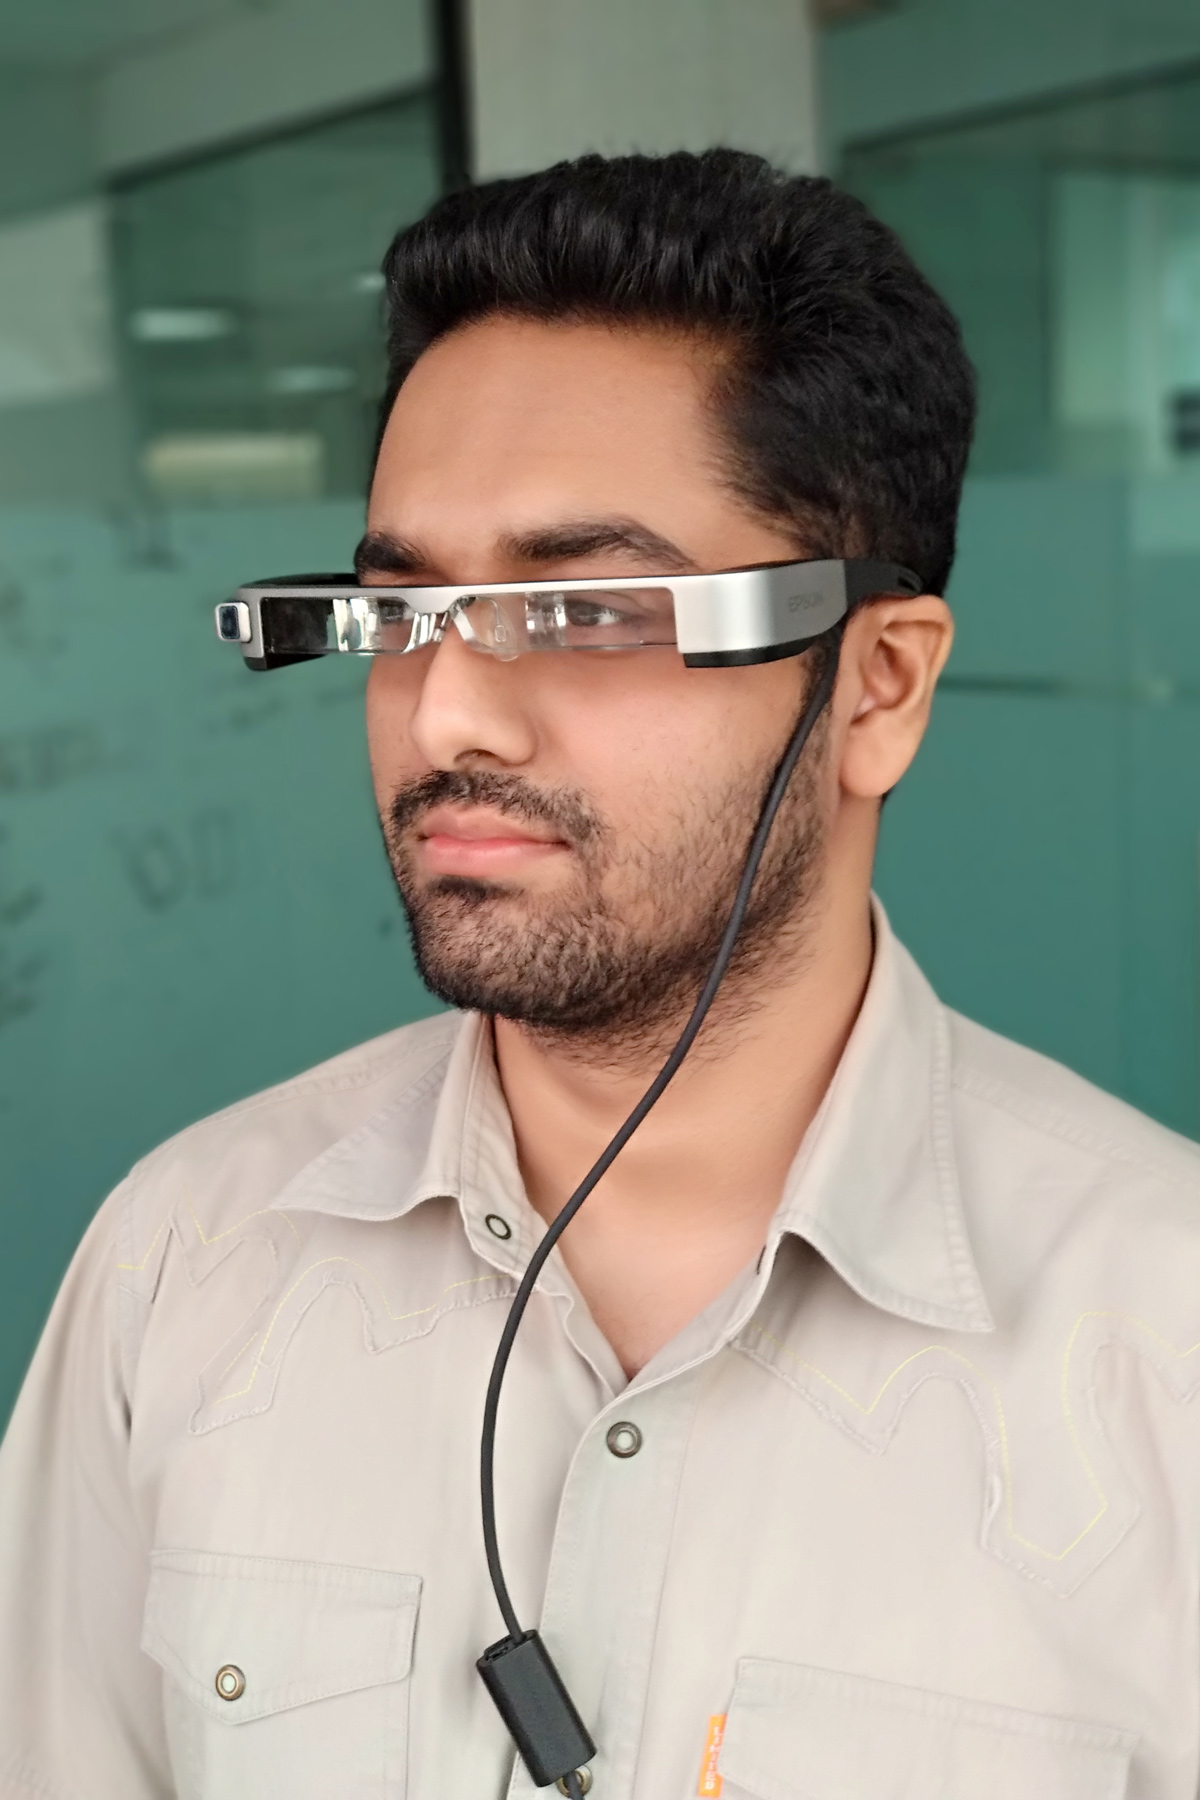 Staqu's smart-glass-based face recognition system